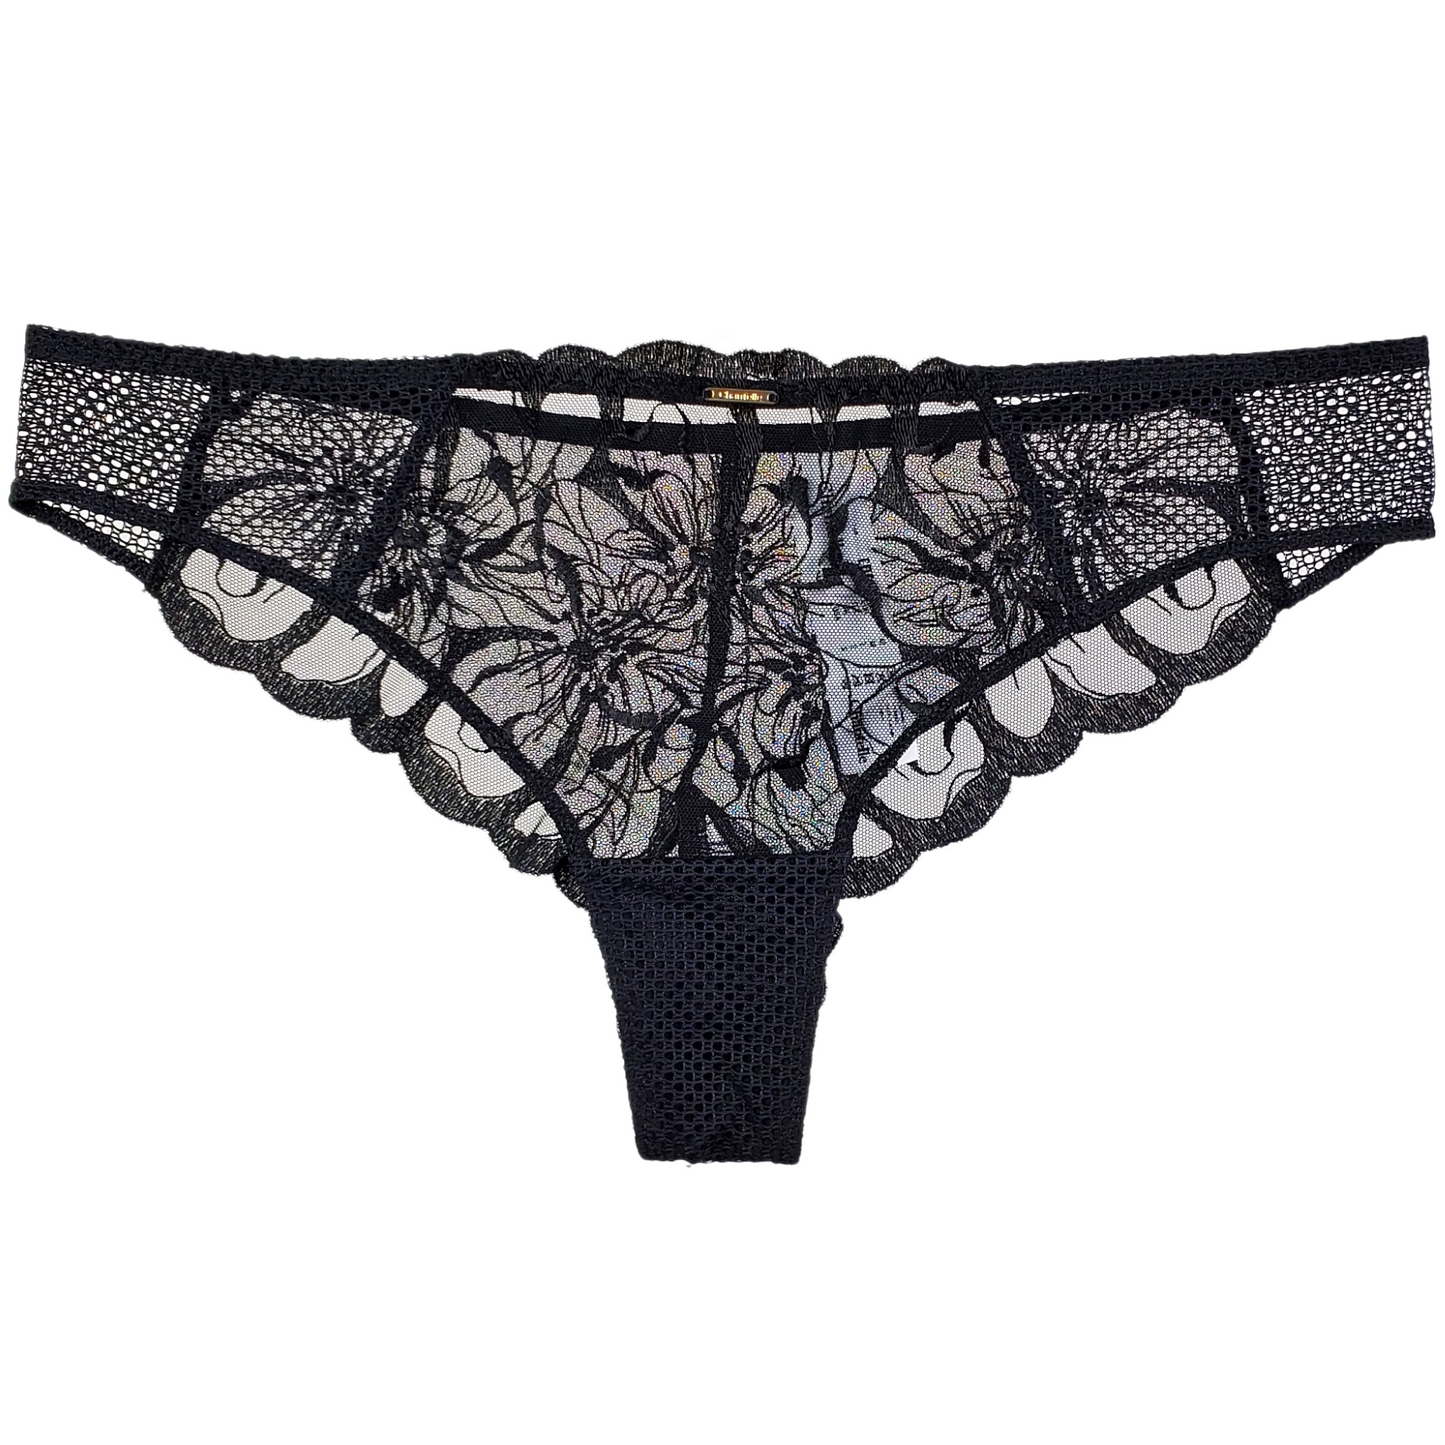 Yasmine Eslami - The Lily Thong in Black